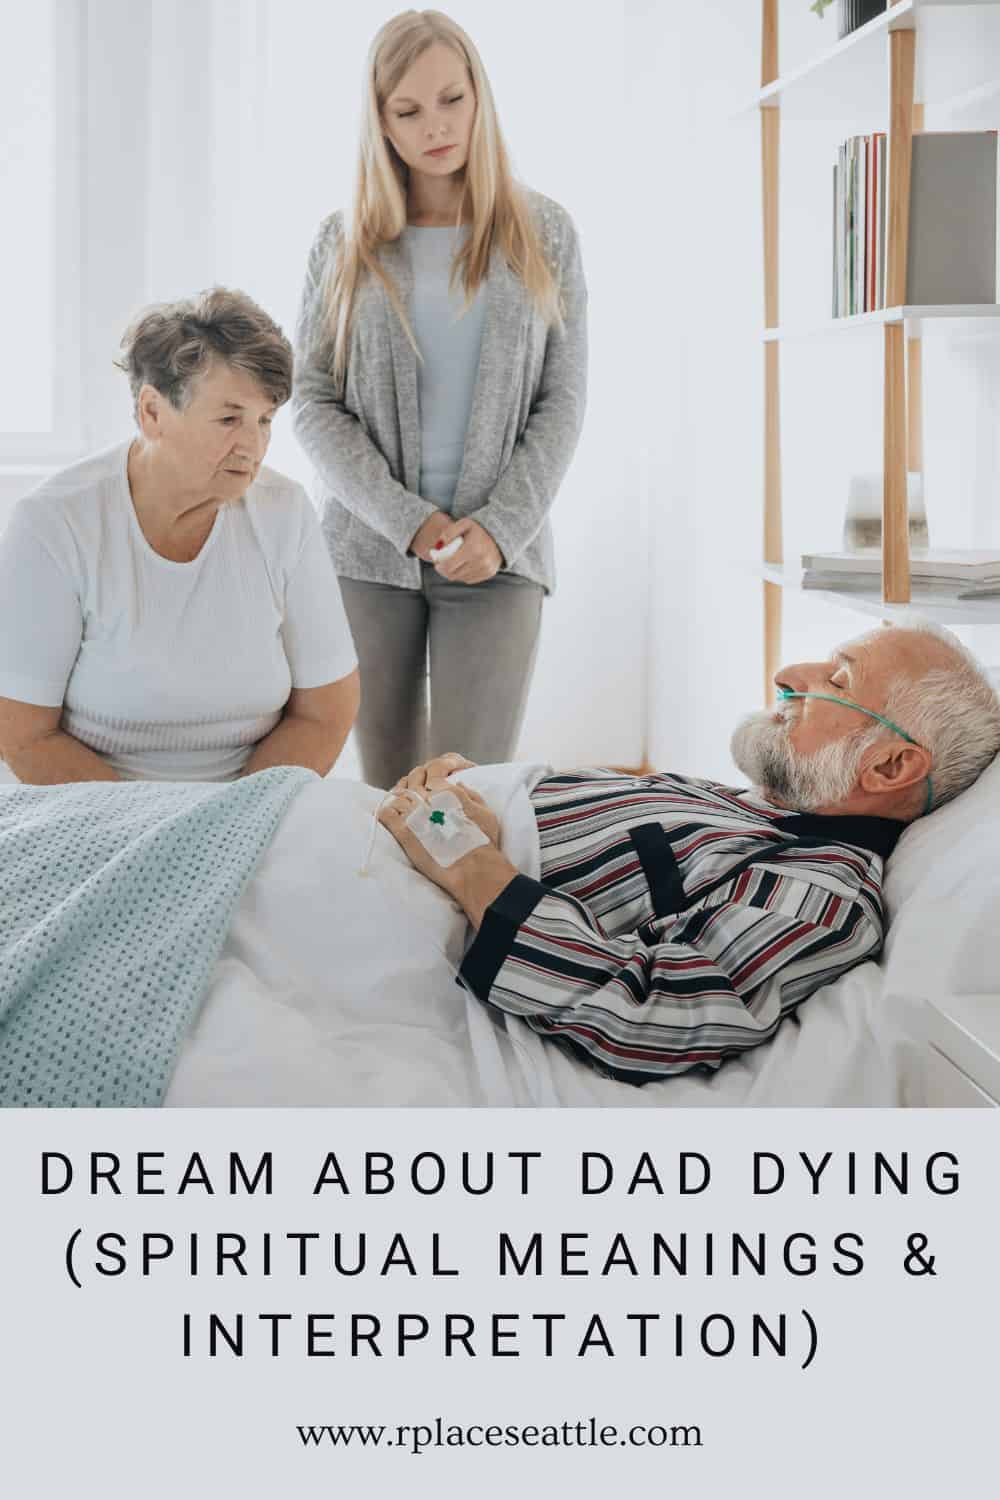 Dream About Dad Dying (Spiritual Meanings & Interpretation)